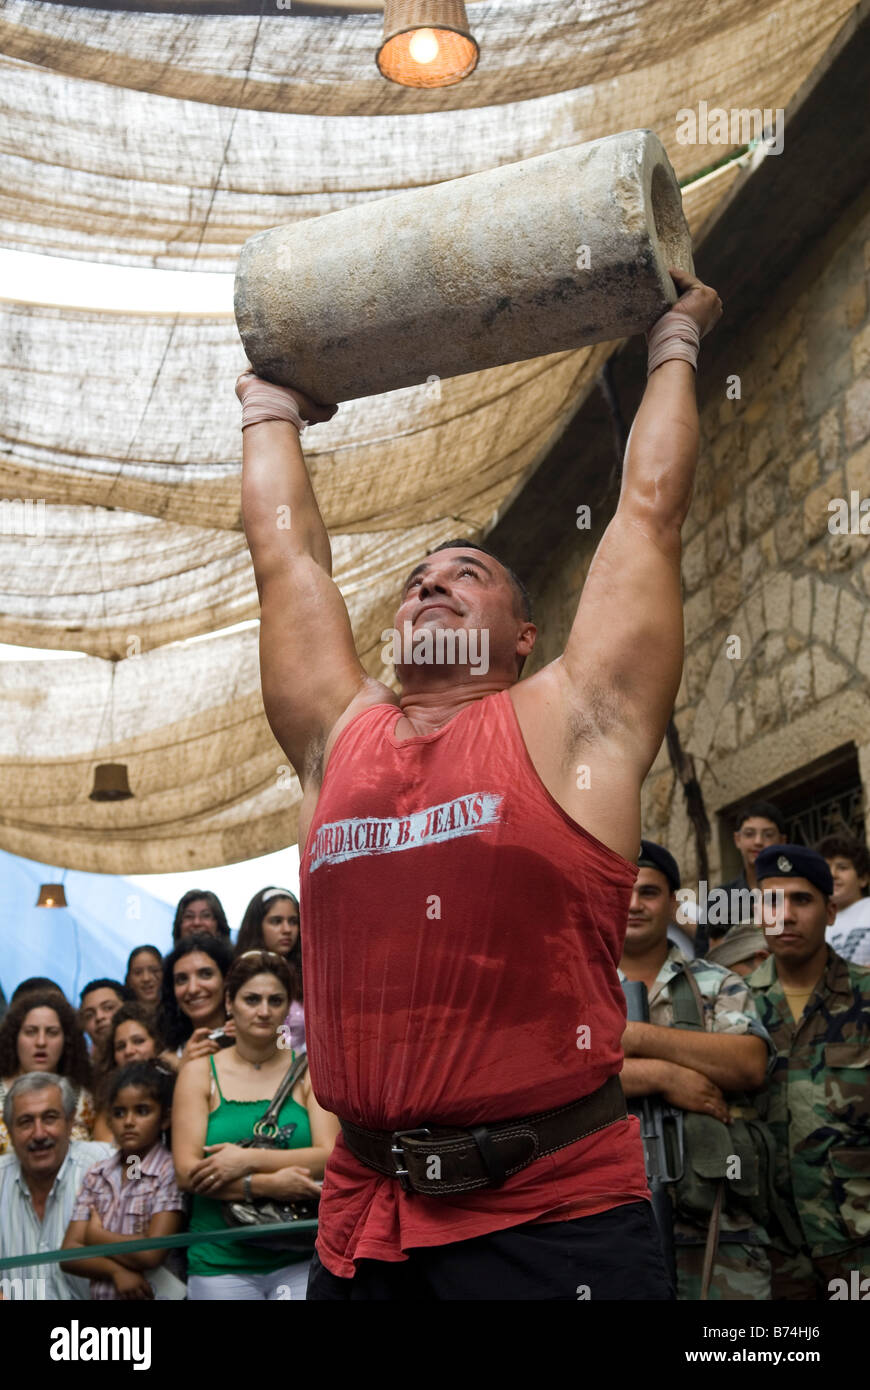 Strong man lifting heavy stone Lebanon Middle East Stock Photo